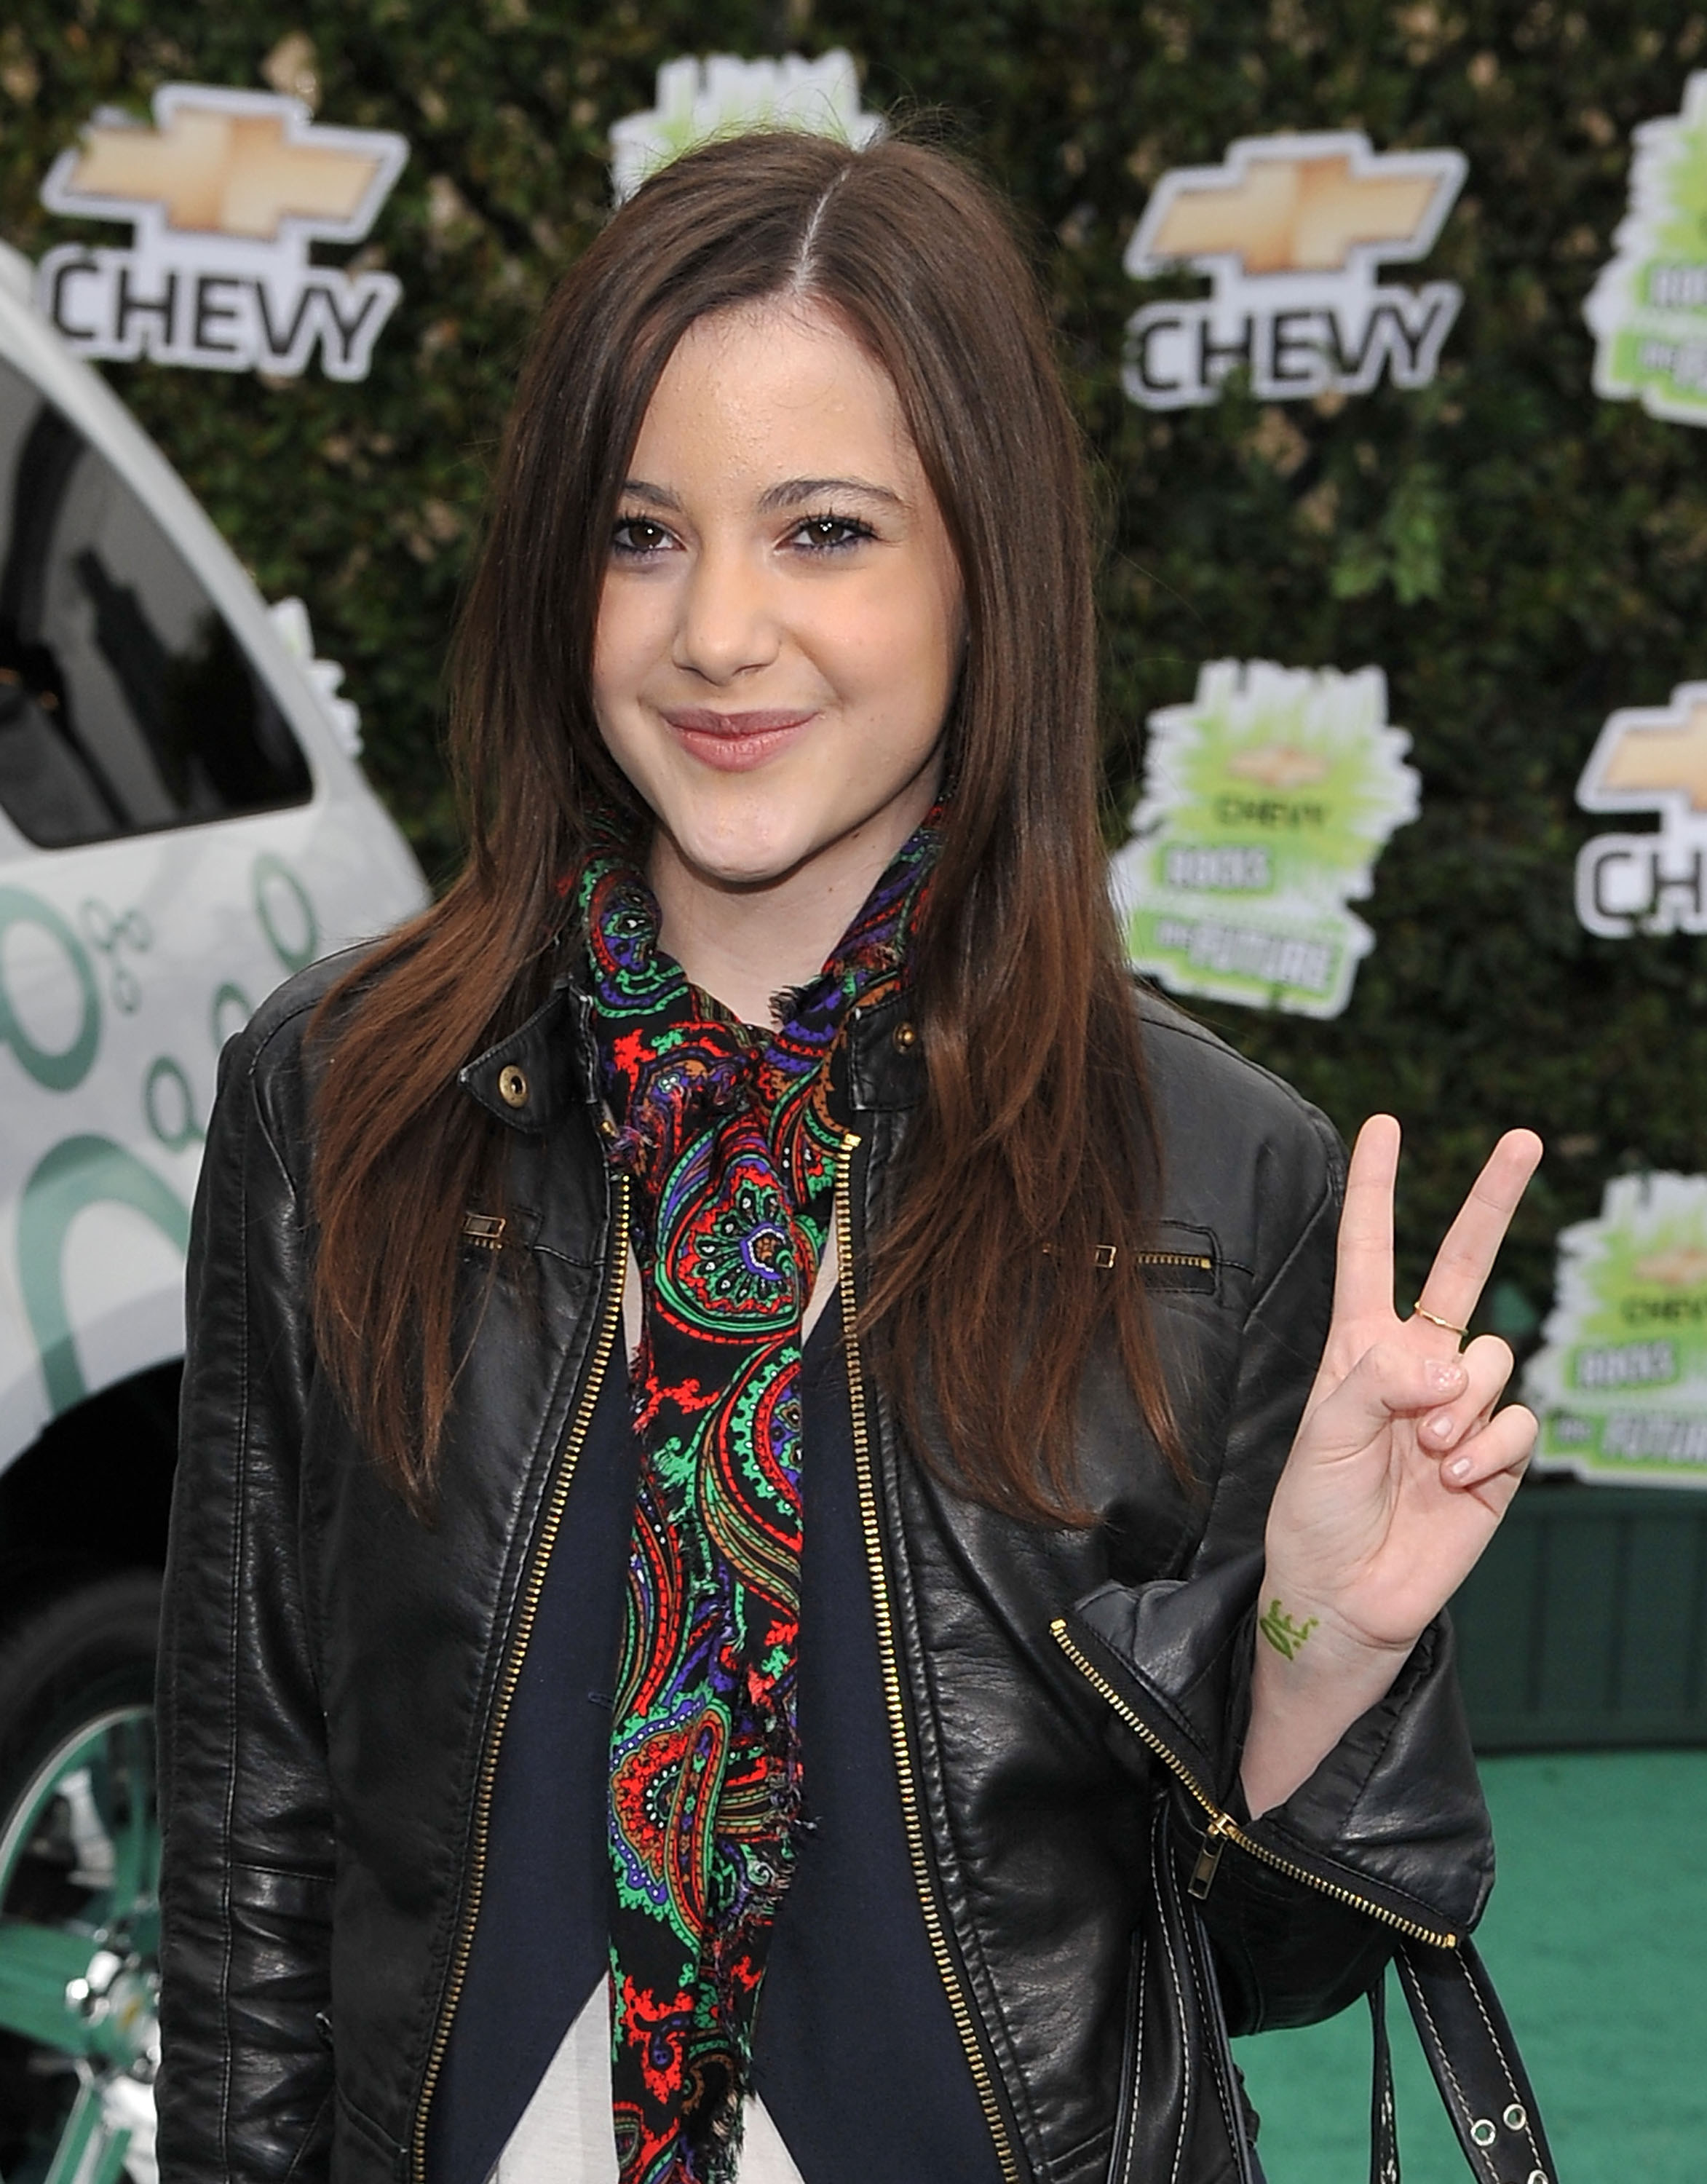 A younger Alexa giving the peace sign as she poses for a photo at an event